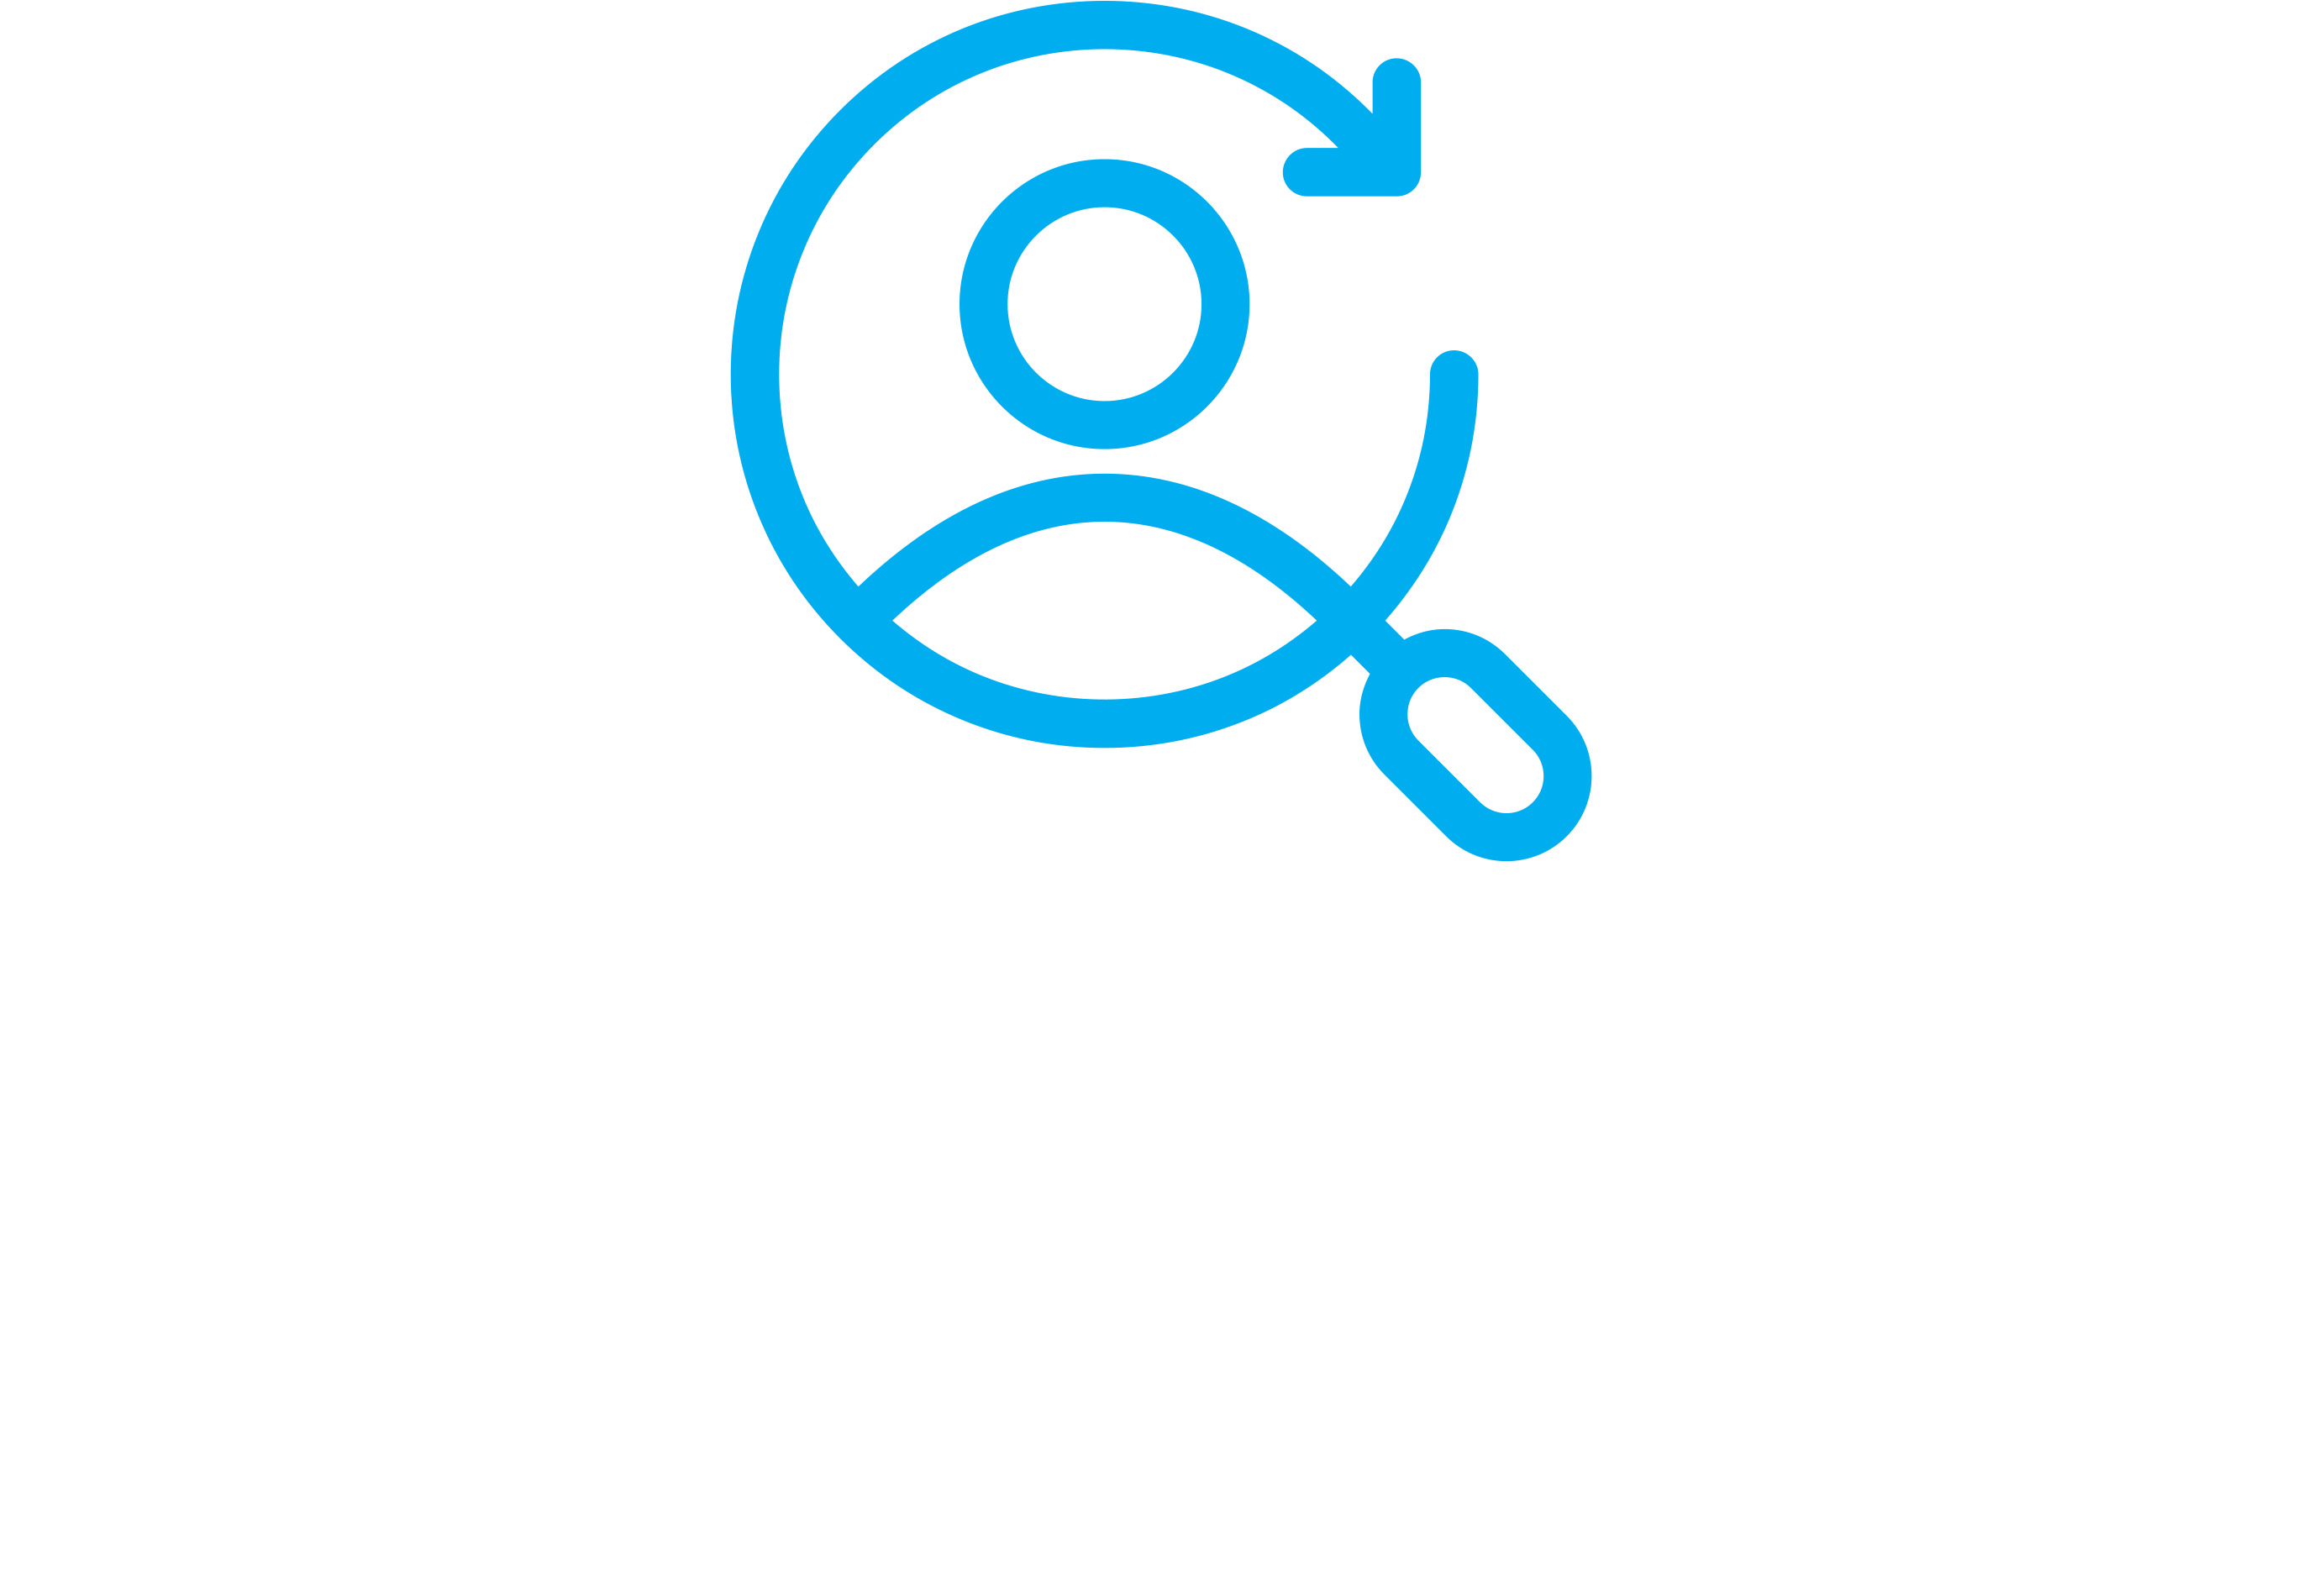 Looking Glass Training